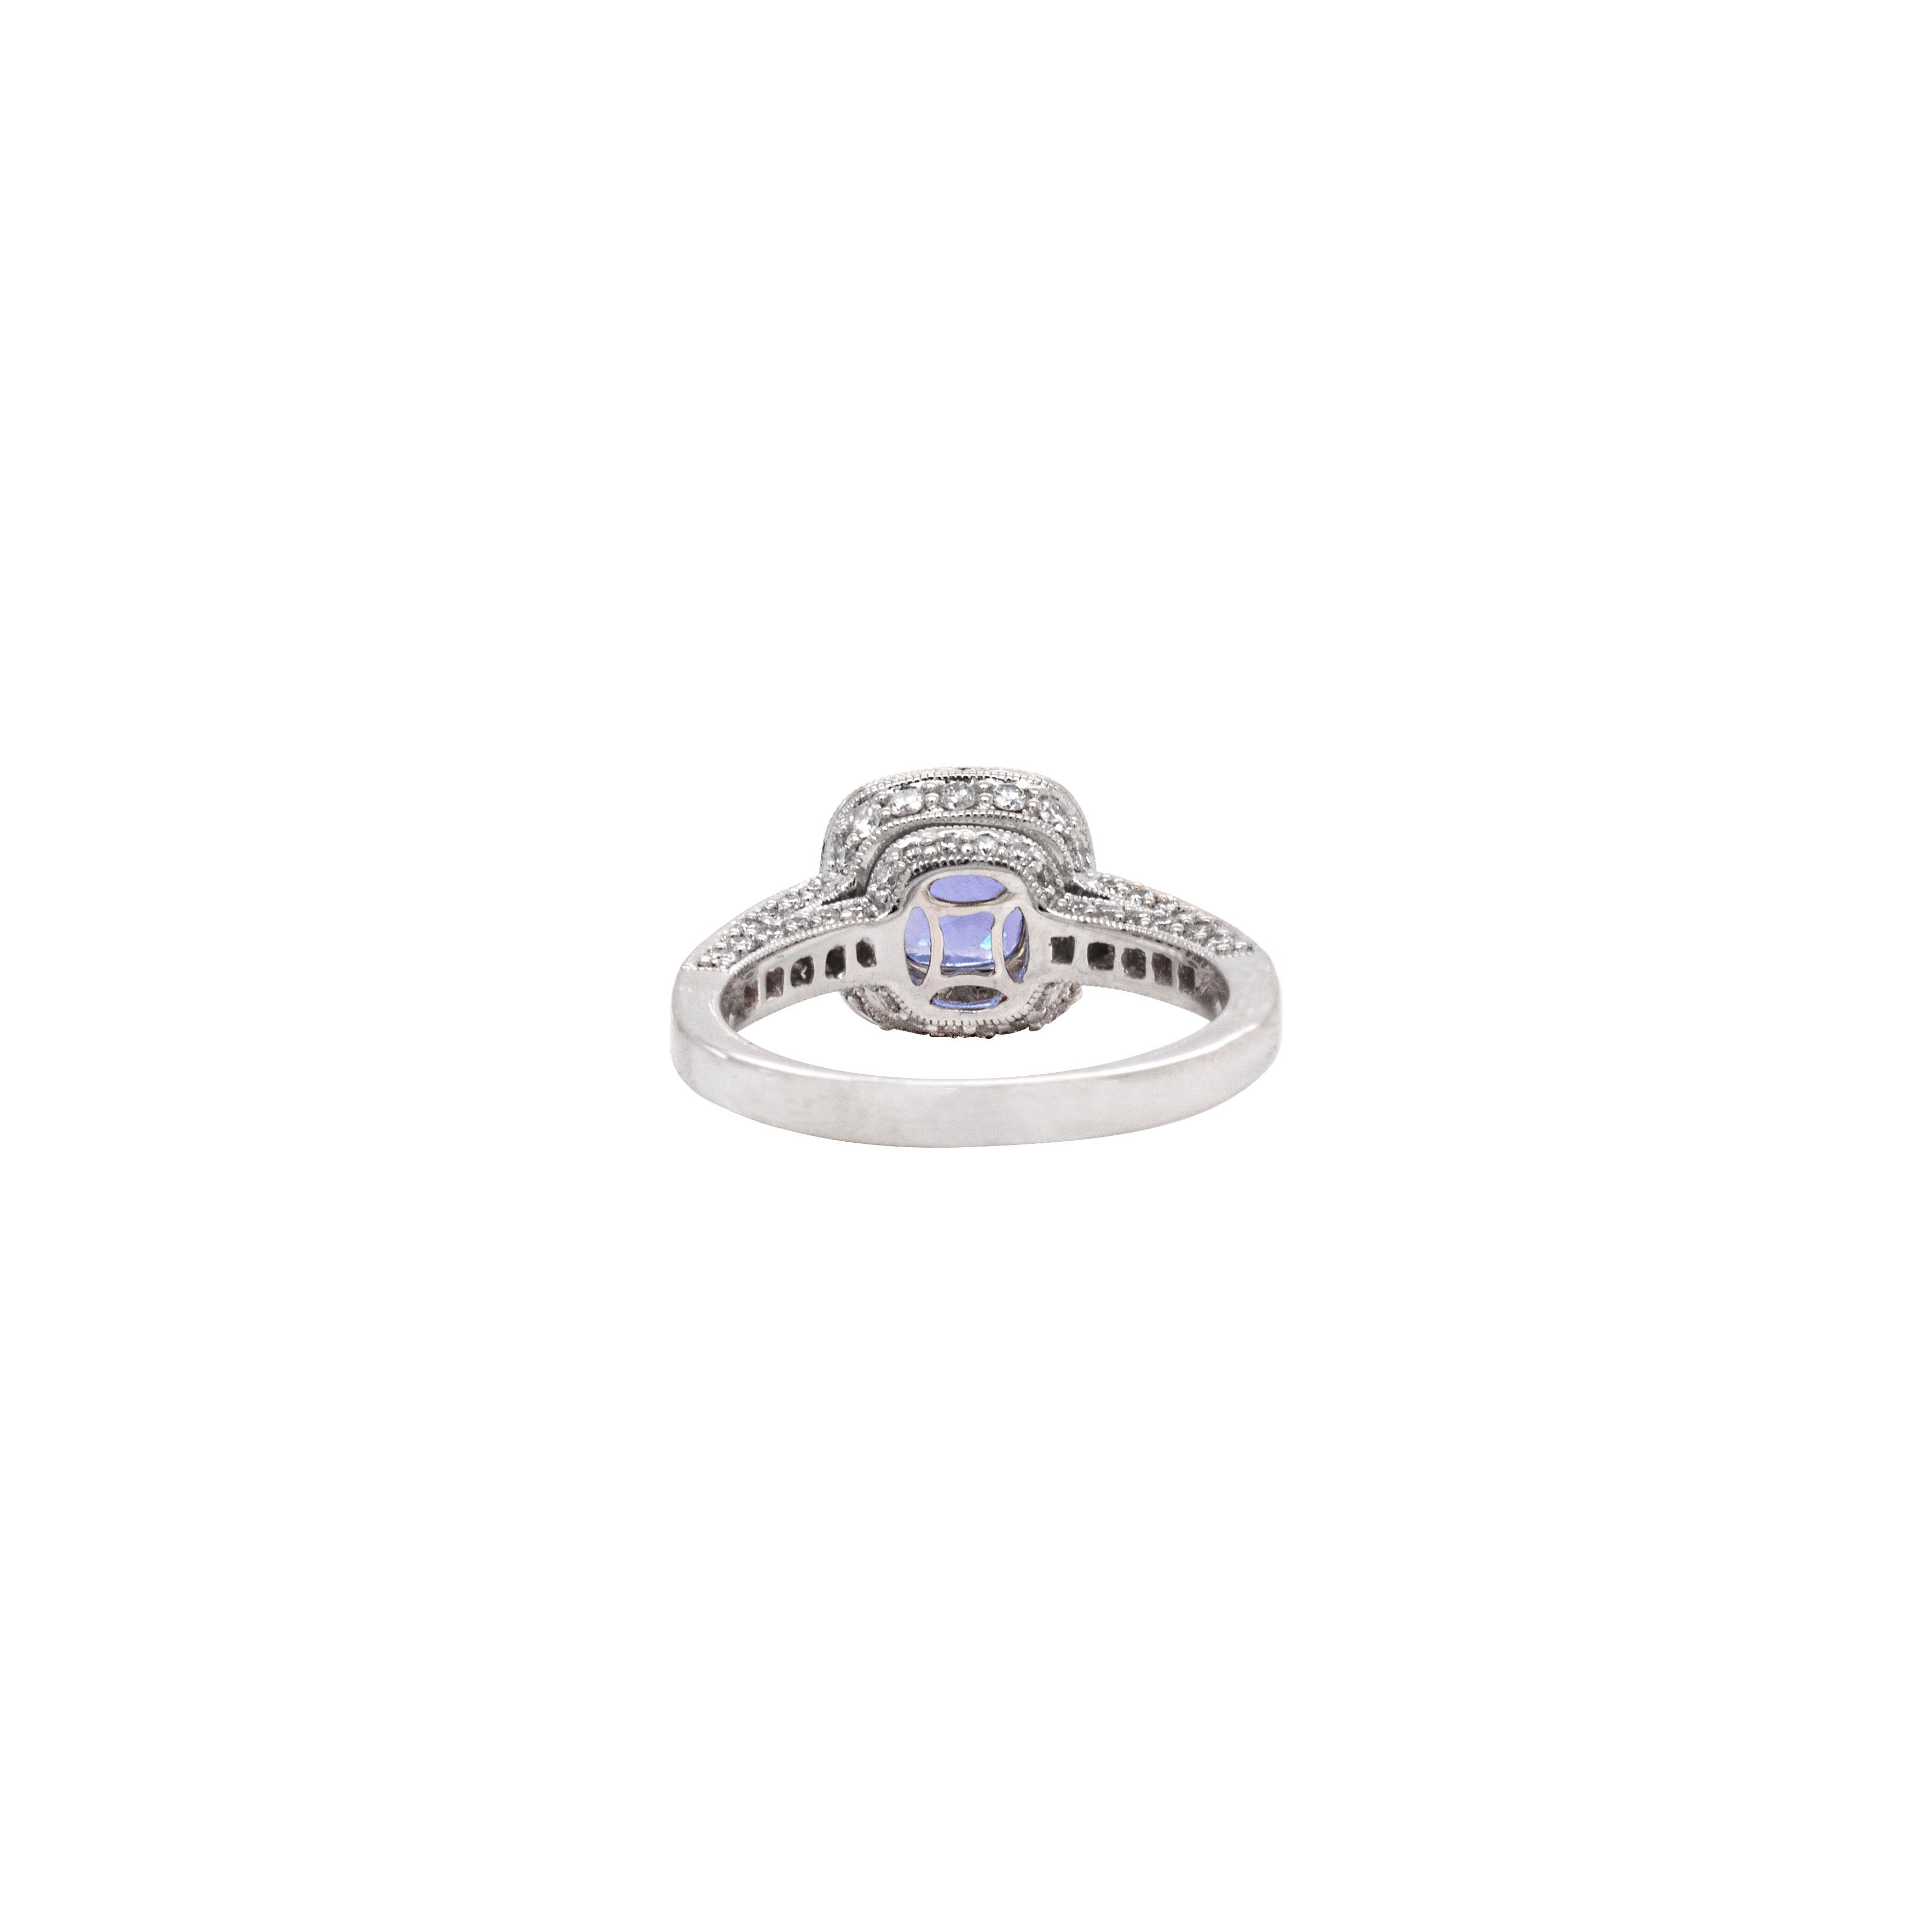 Express your commitment to a wonderful future together with this fabulous 18 carat white gold cluster engagement ring.

This fantastic ring is expertly detailed to perfection and showcases a charming 1.32ct cushion shaped tanzanite mounted in the